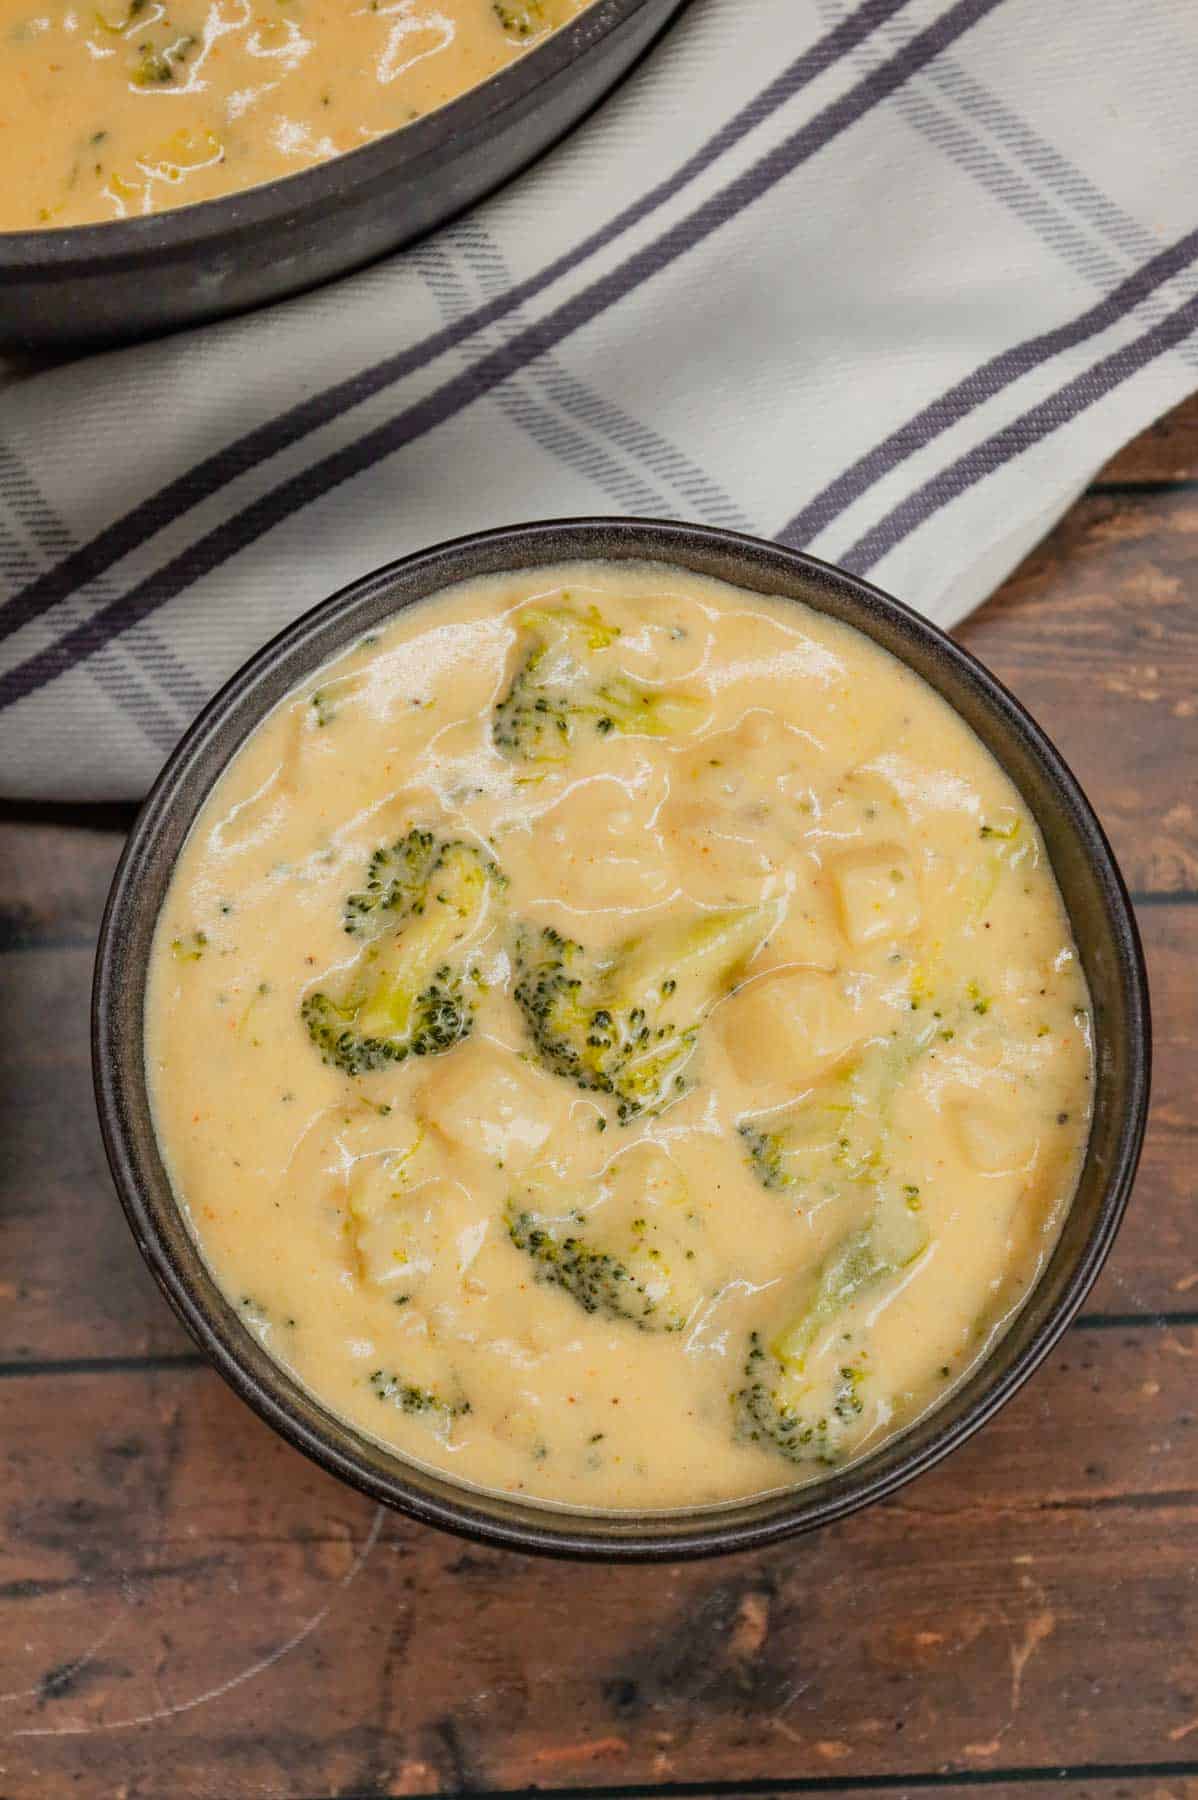 Broccoli Potato Soup is a hearty soup recipe loaded with diced hash brown potatoes, broccoli florets, cheddar cheese and instant mashed potatoes.